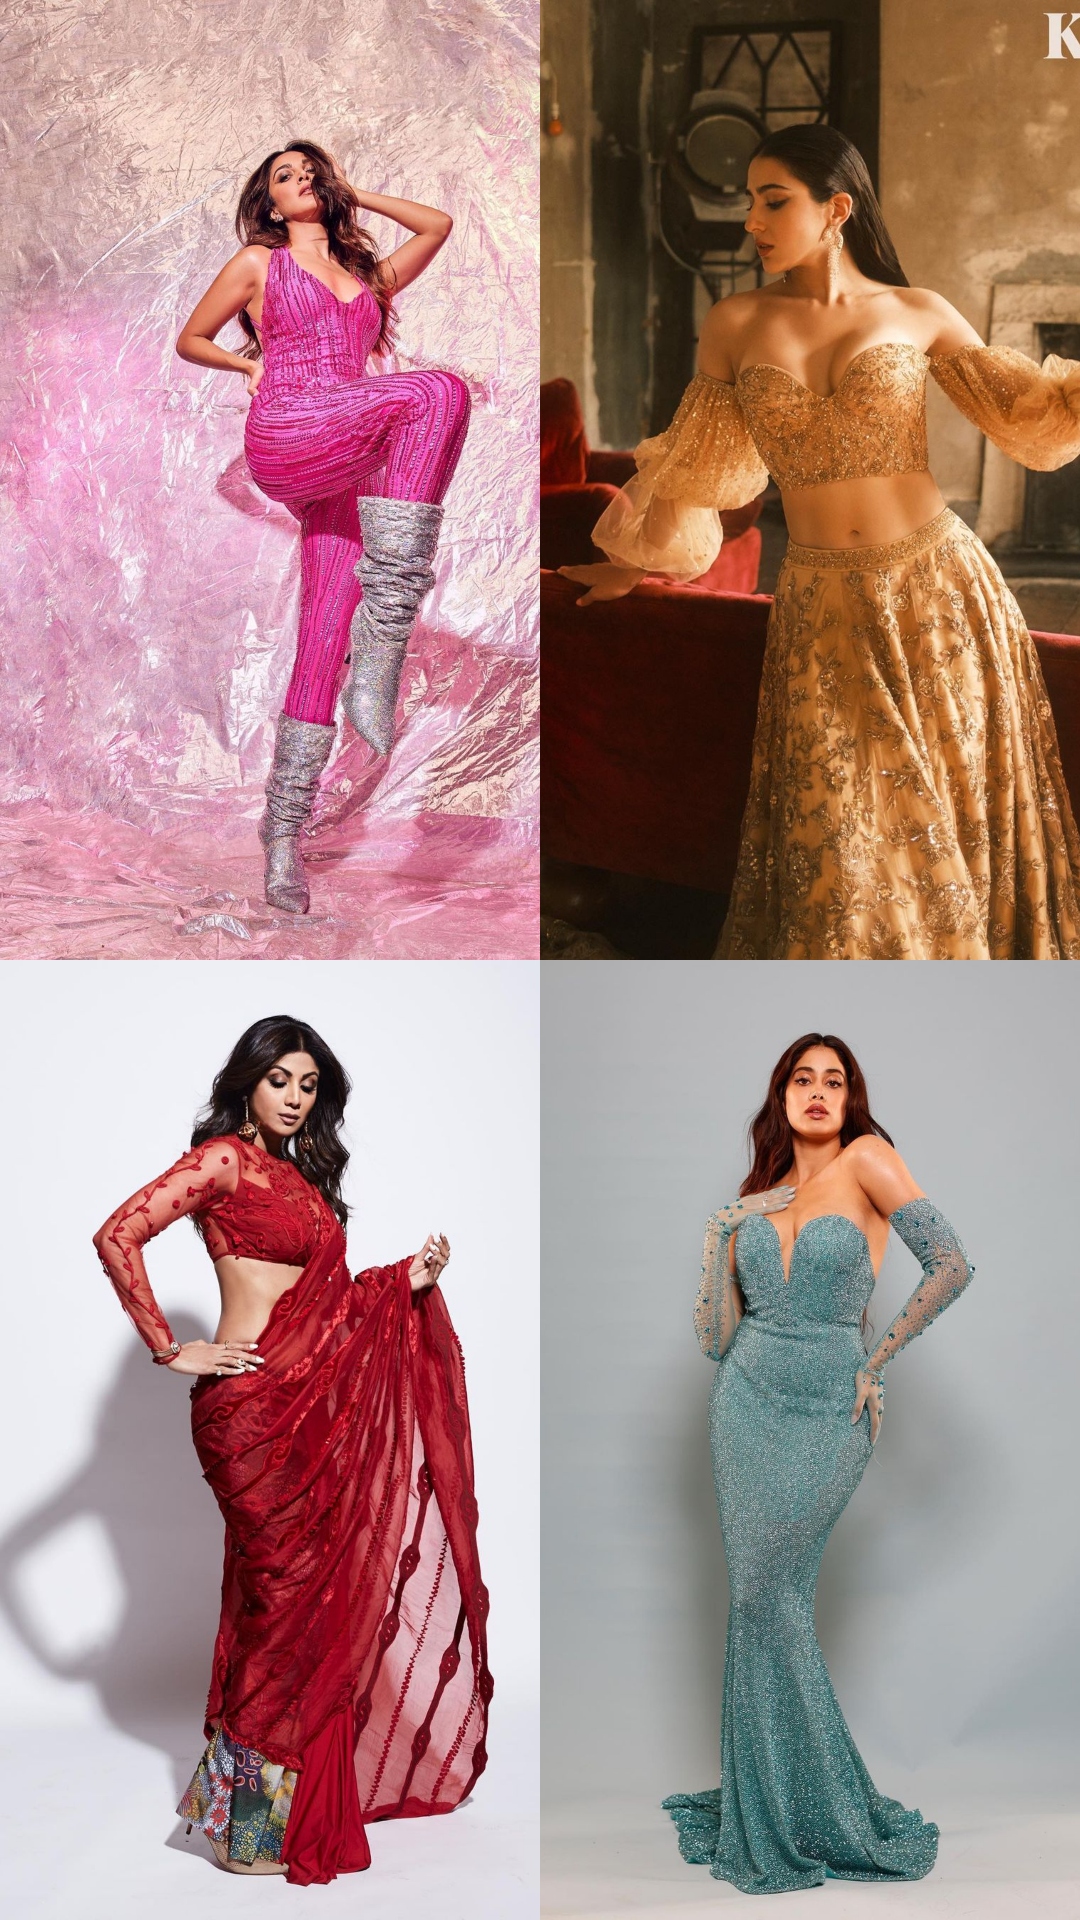 Kiara Advani to Jahnvi Kapoor, these Bollywood divas know how to shine in shimmery outfits